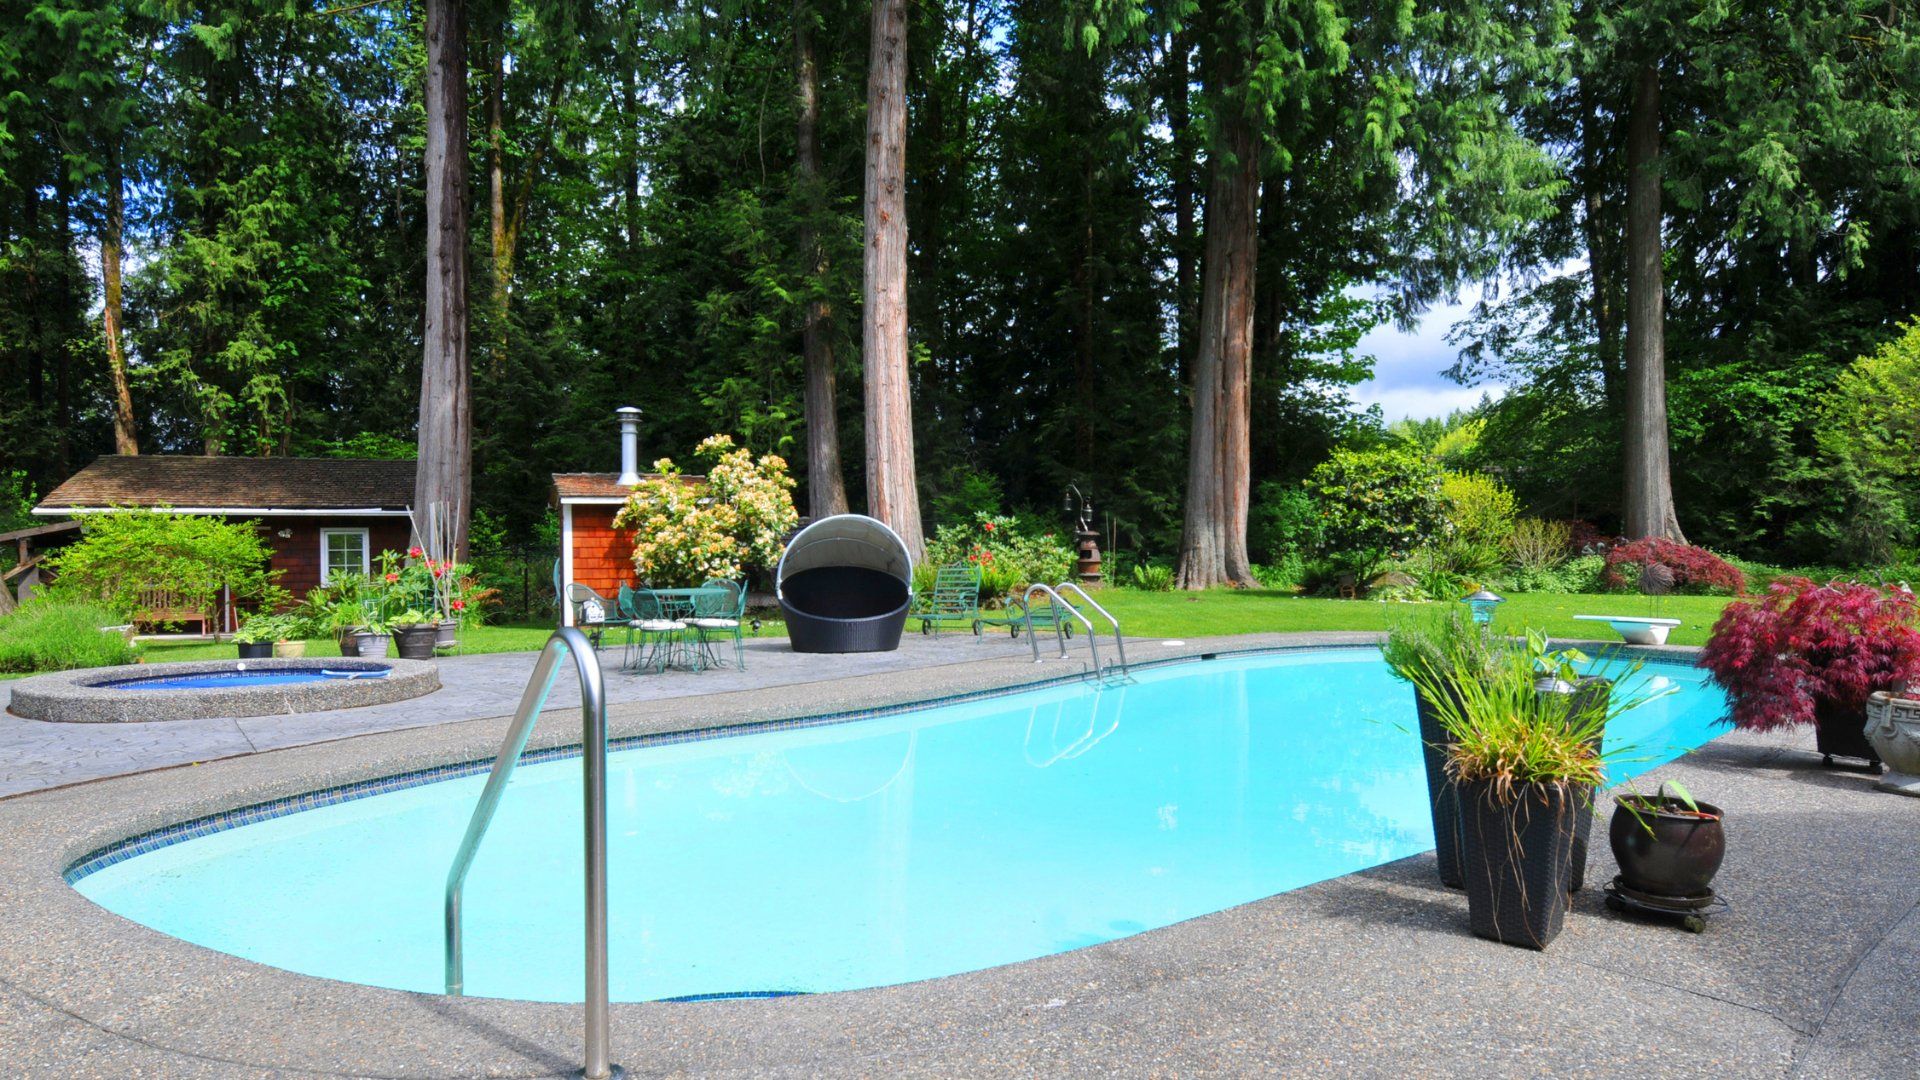 Large backyard featuring a pool, large trees, jacuzzi, pool house, and a concrete pool deck.